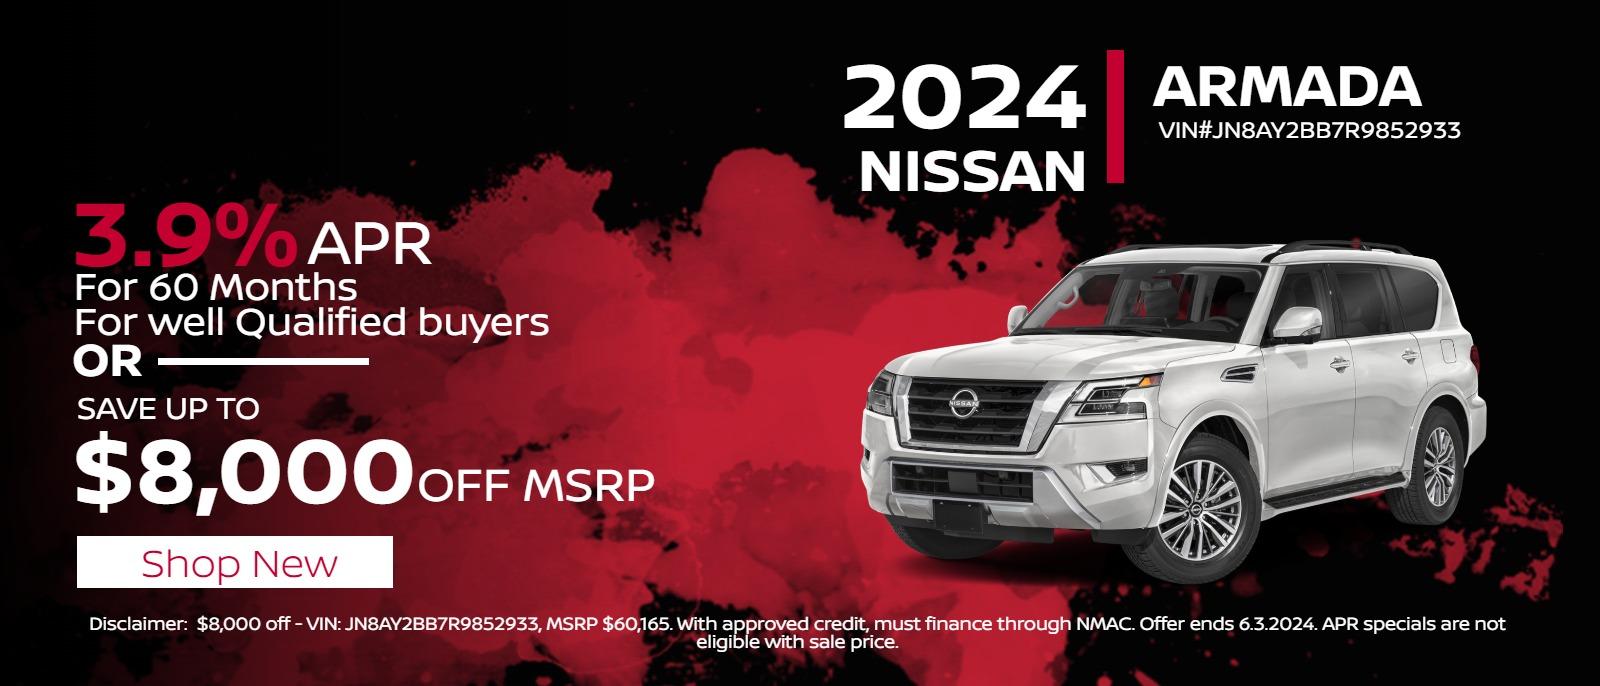 Armada
2024 Nissan Armada
Save up to
$8,000
Off MSRP

Or

3.9%
APR Financing
For 60mos.
For well Qualified buyers